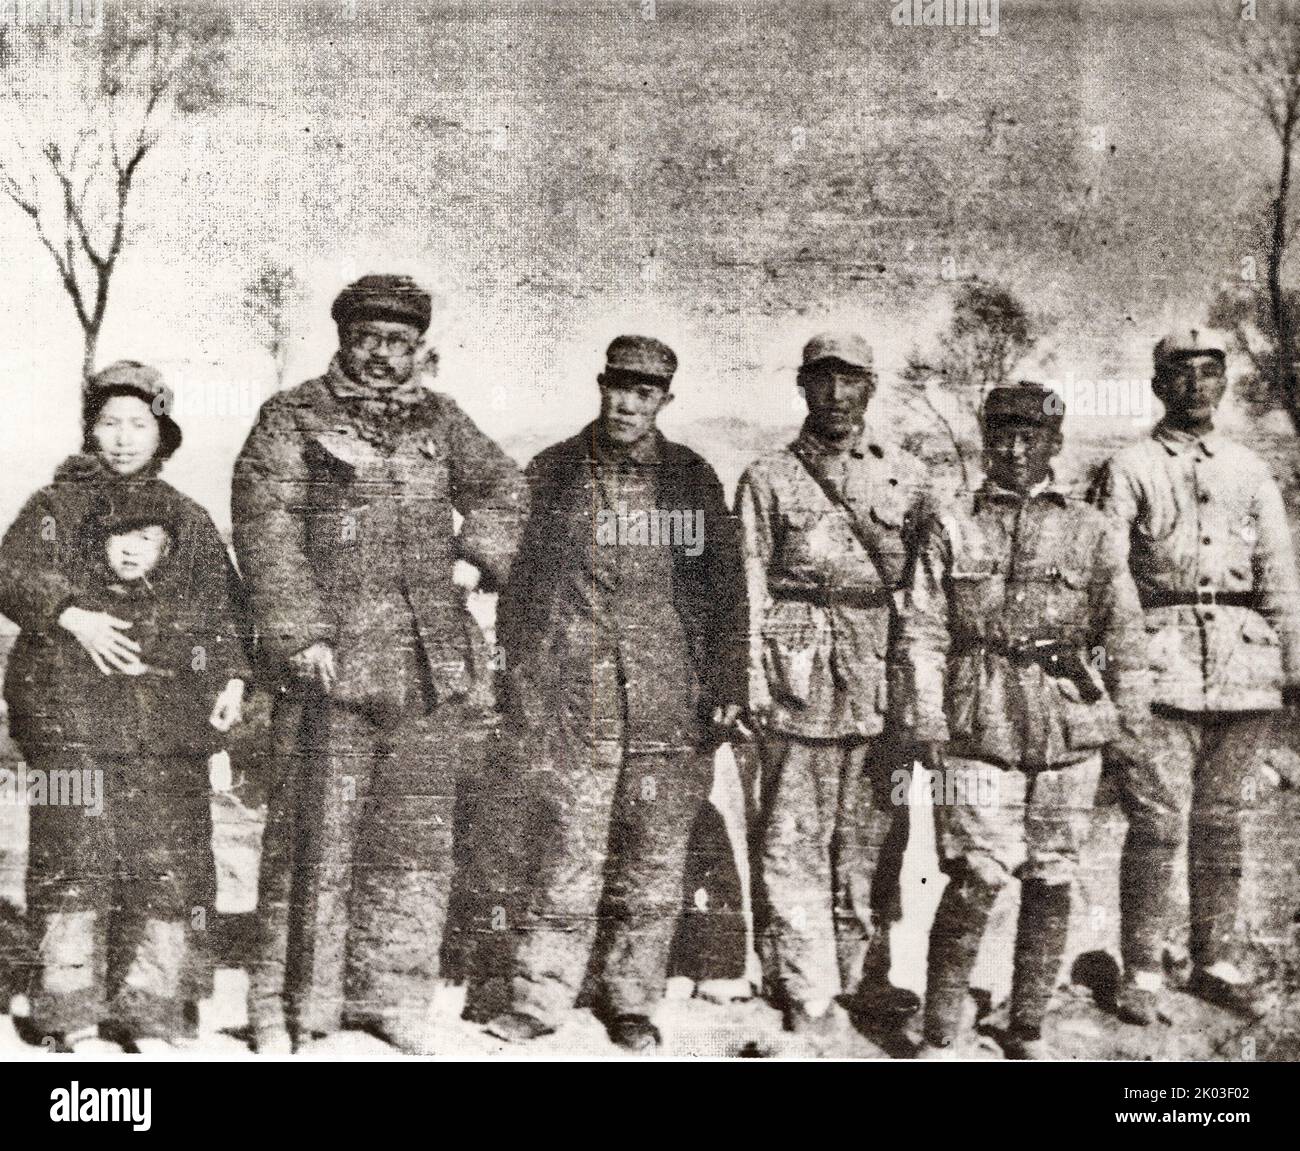 In the beginning of 1948, Ren Bishi and his entourage took pictures by the Yellow River. Ren Bishi was a military and political leader in the early Chinese Communist Party. In the early 1930s, Stock Photo